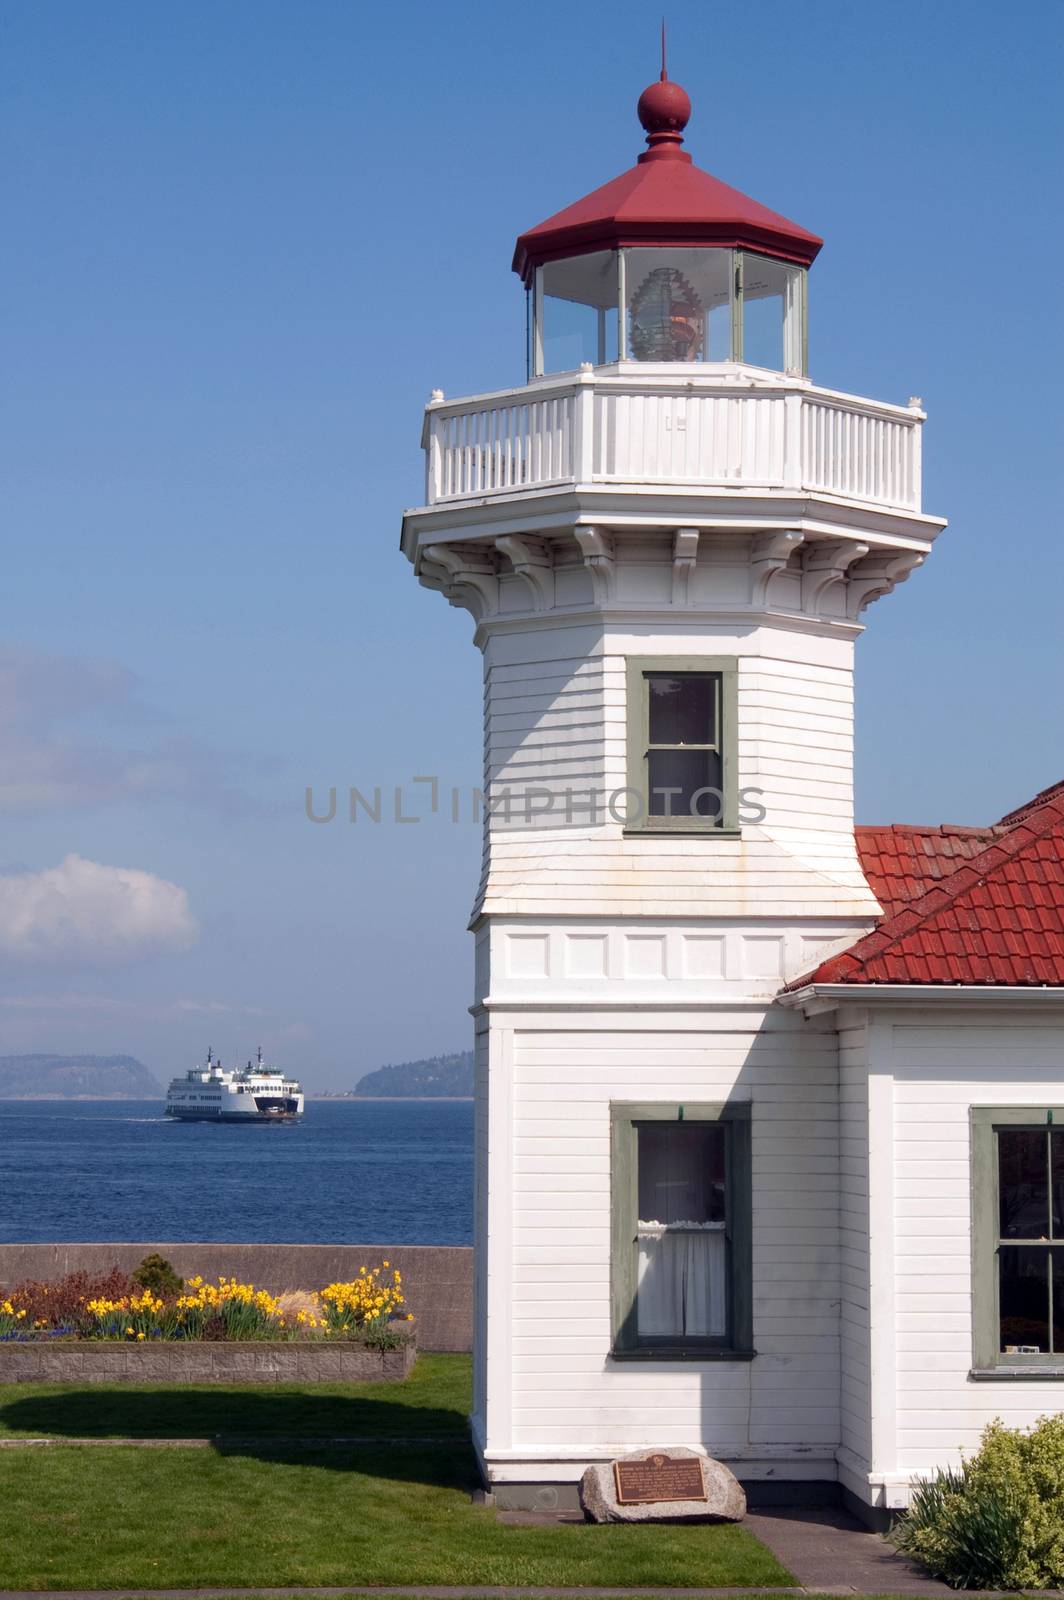 West Coast Lighthouse Ferry Arriving Puget Sound Washington by ChrisBoswell